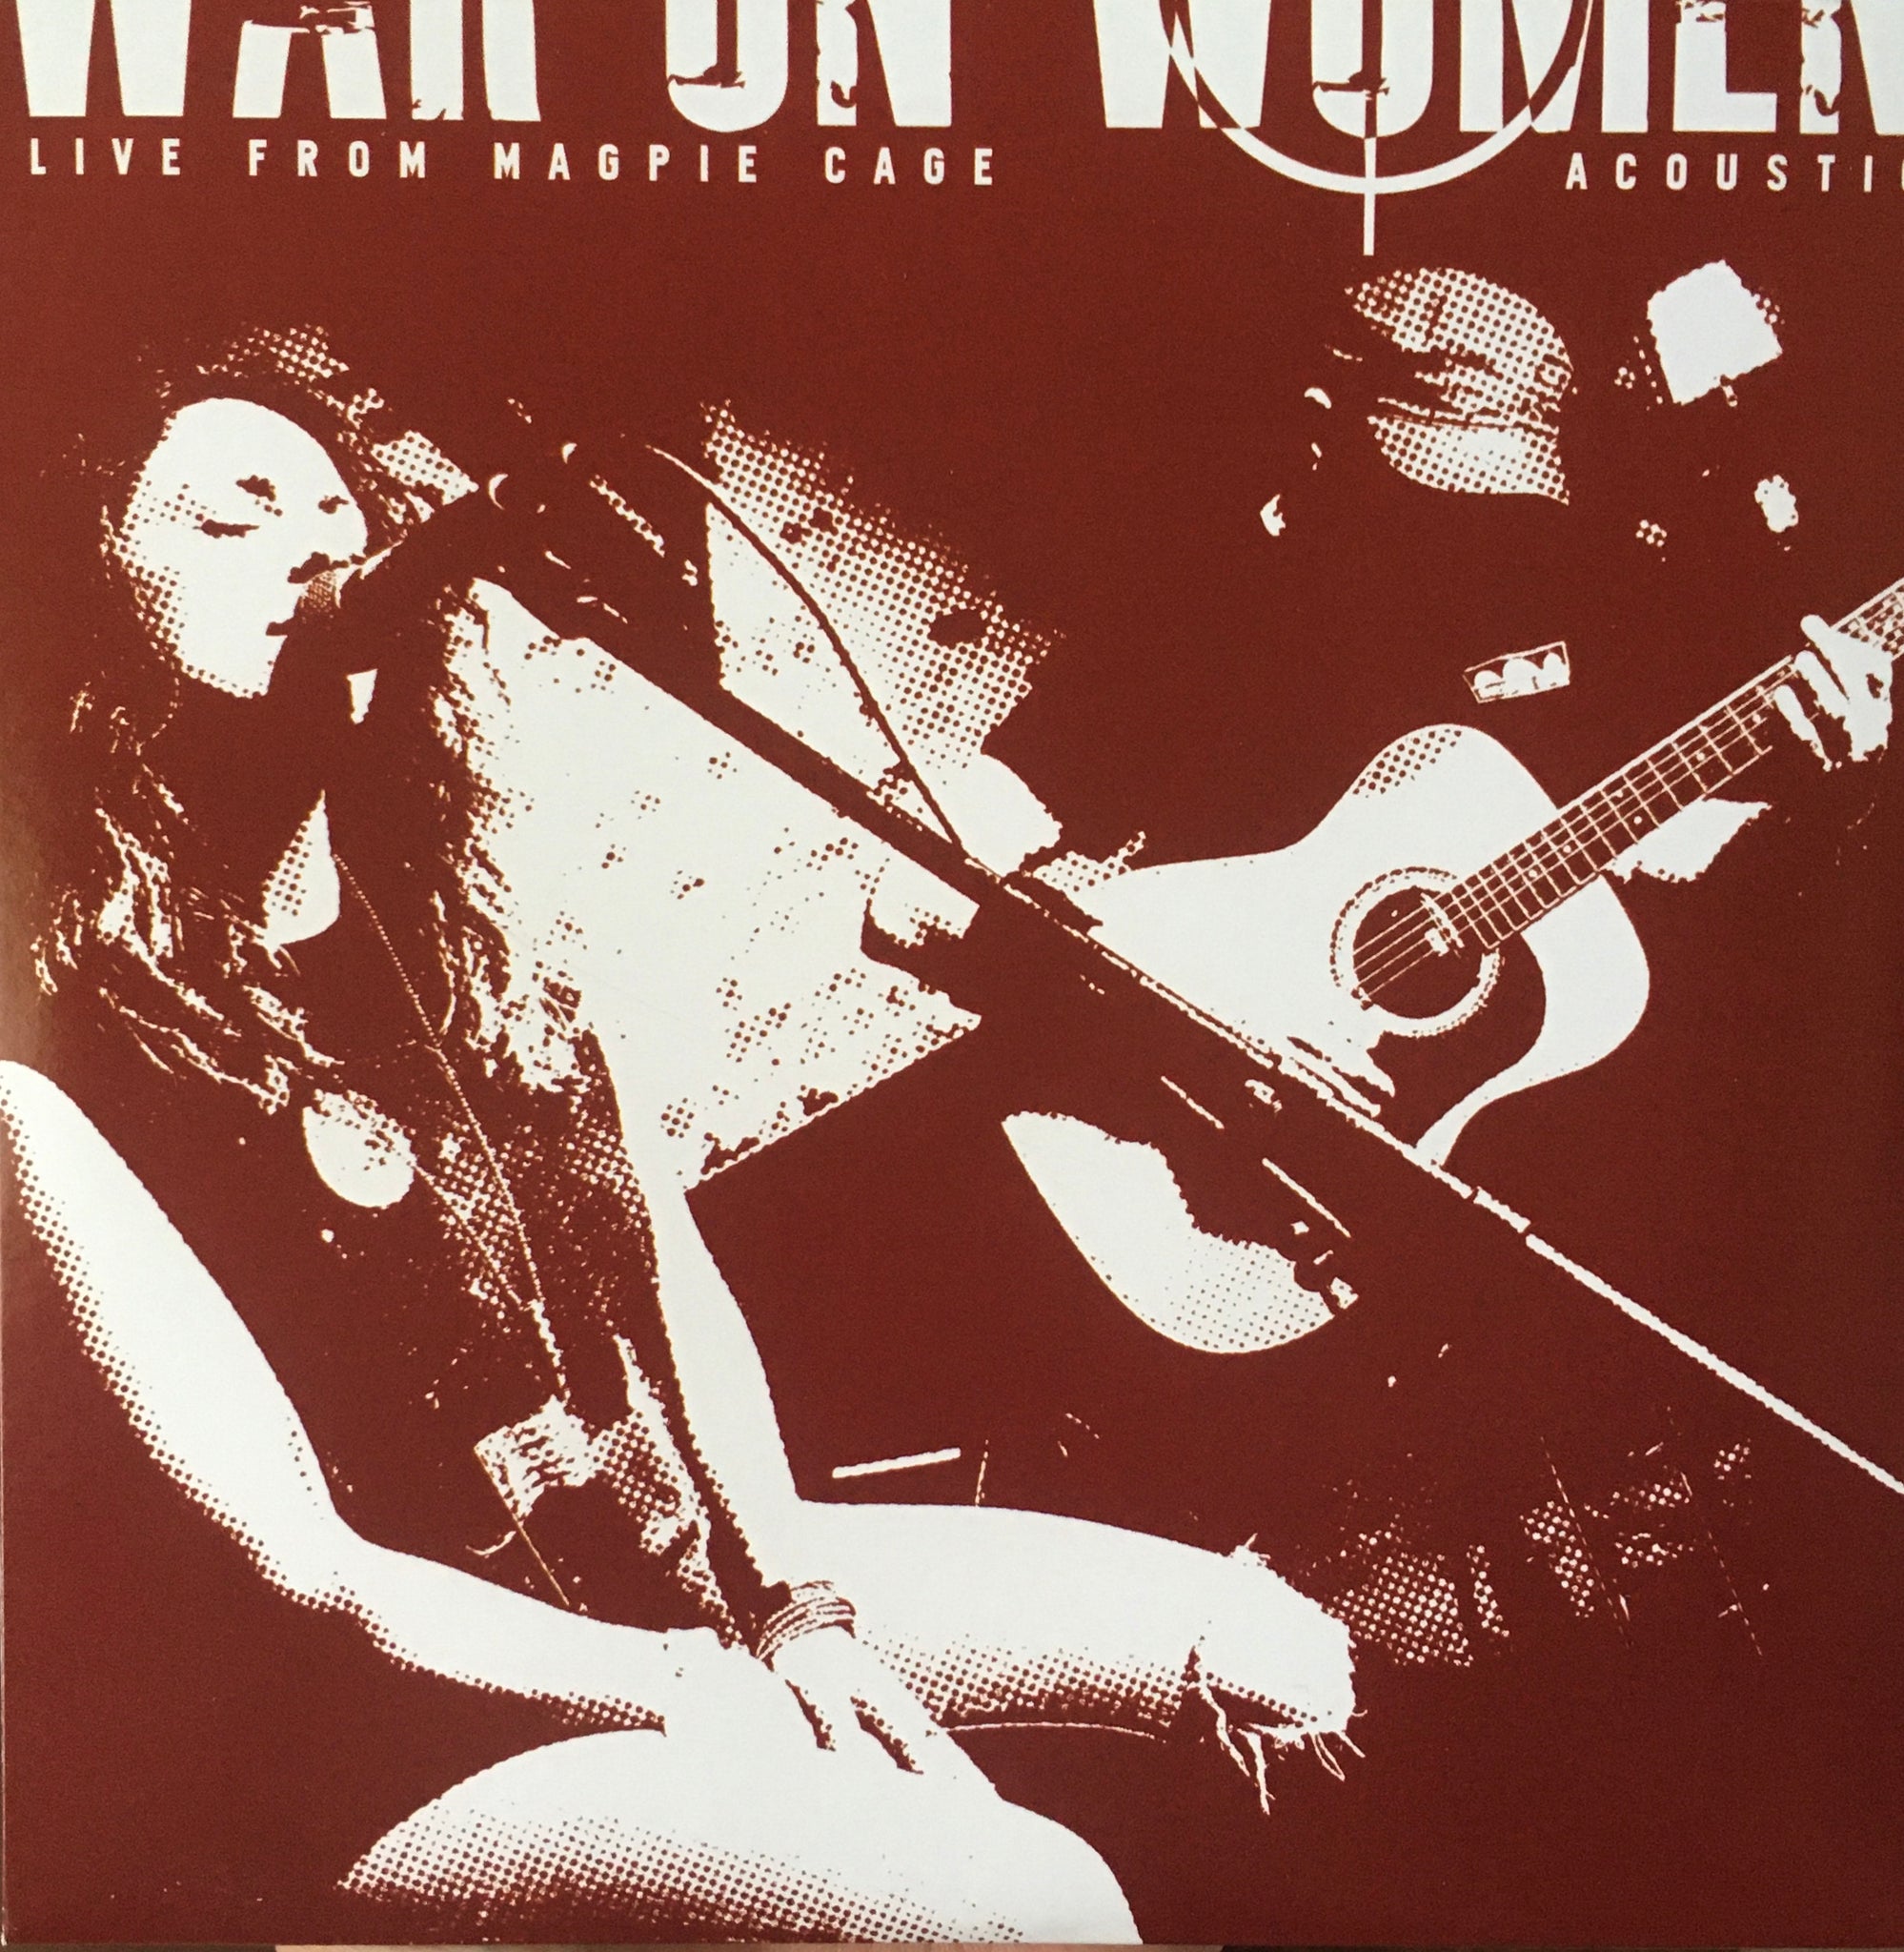 War On Women "Live From Magpie Cage" Single (2018)